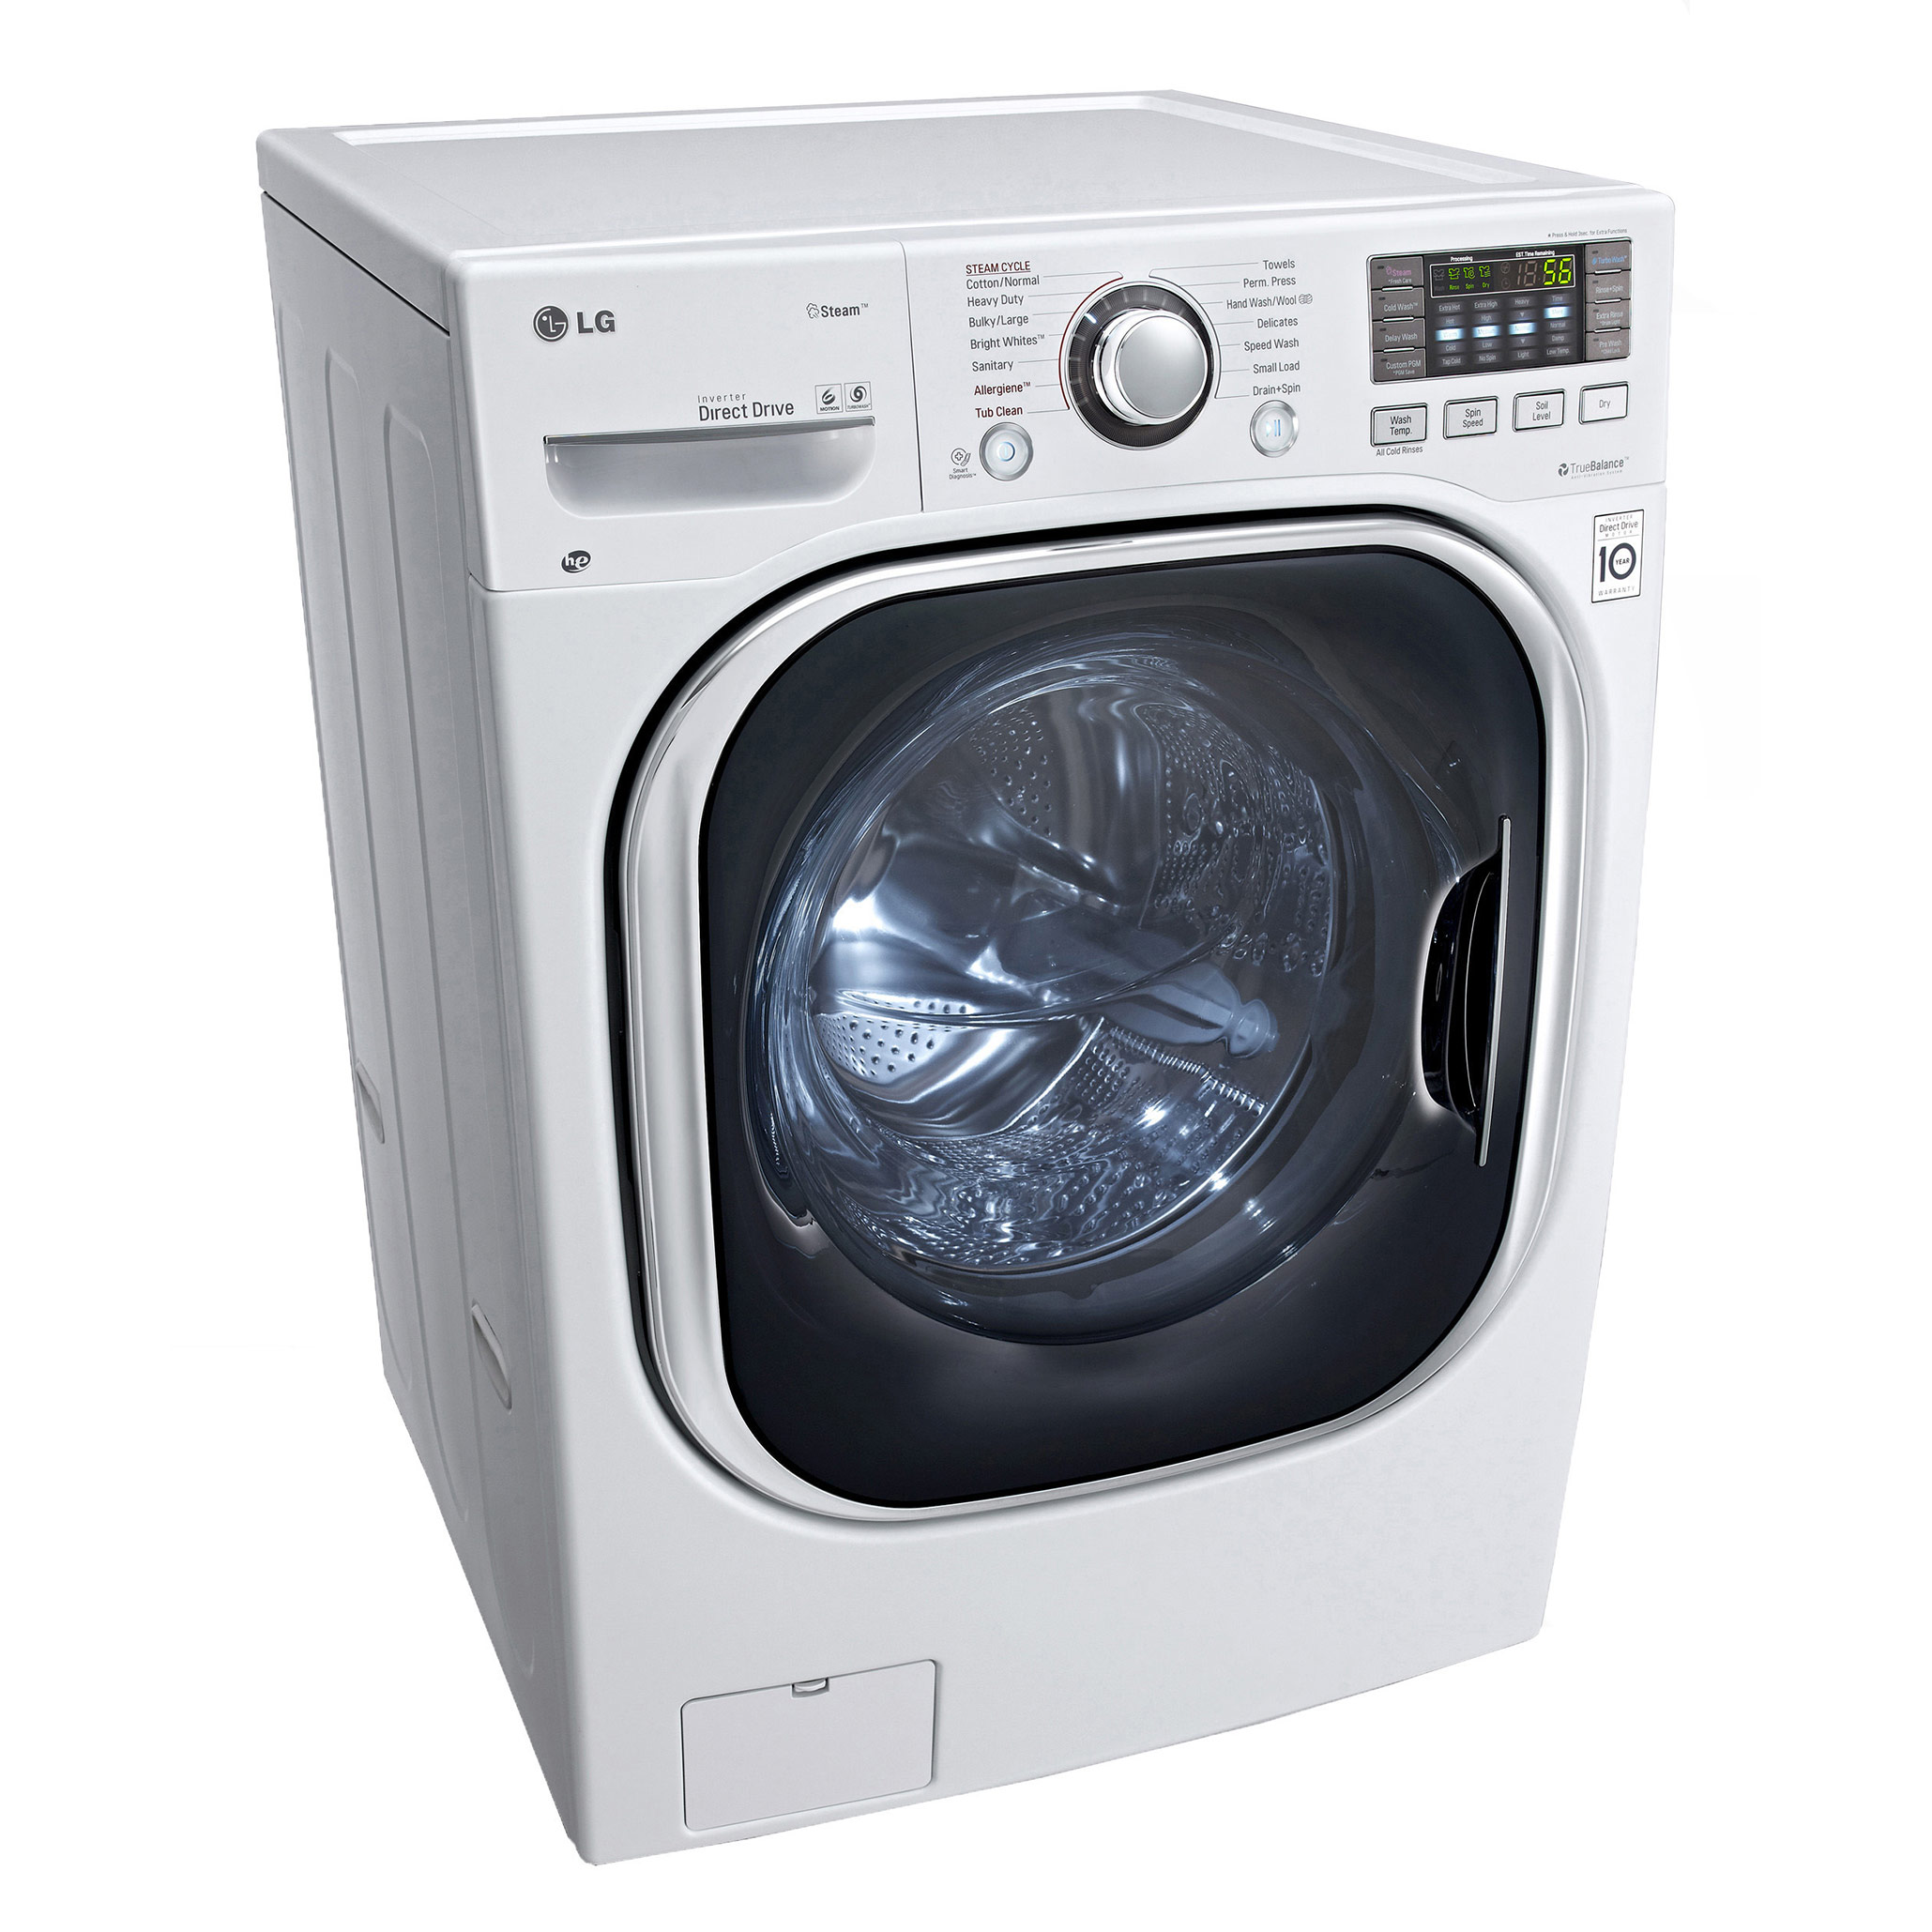 LG WM3997HWA | All in One Washer Dryer Combo | LGWasherDryer.com Large Capacity All In One Washer Dryer